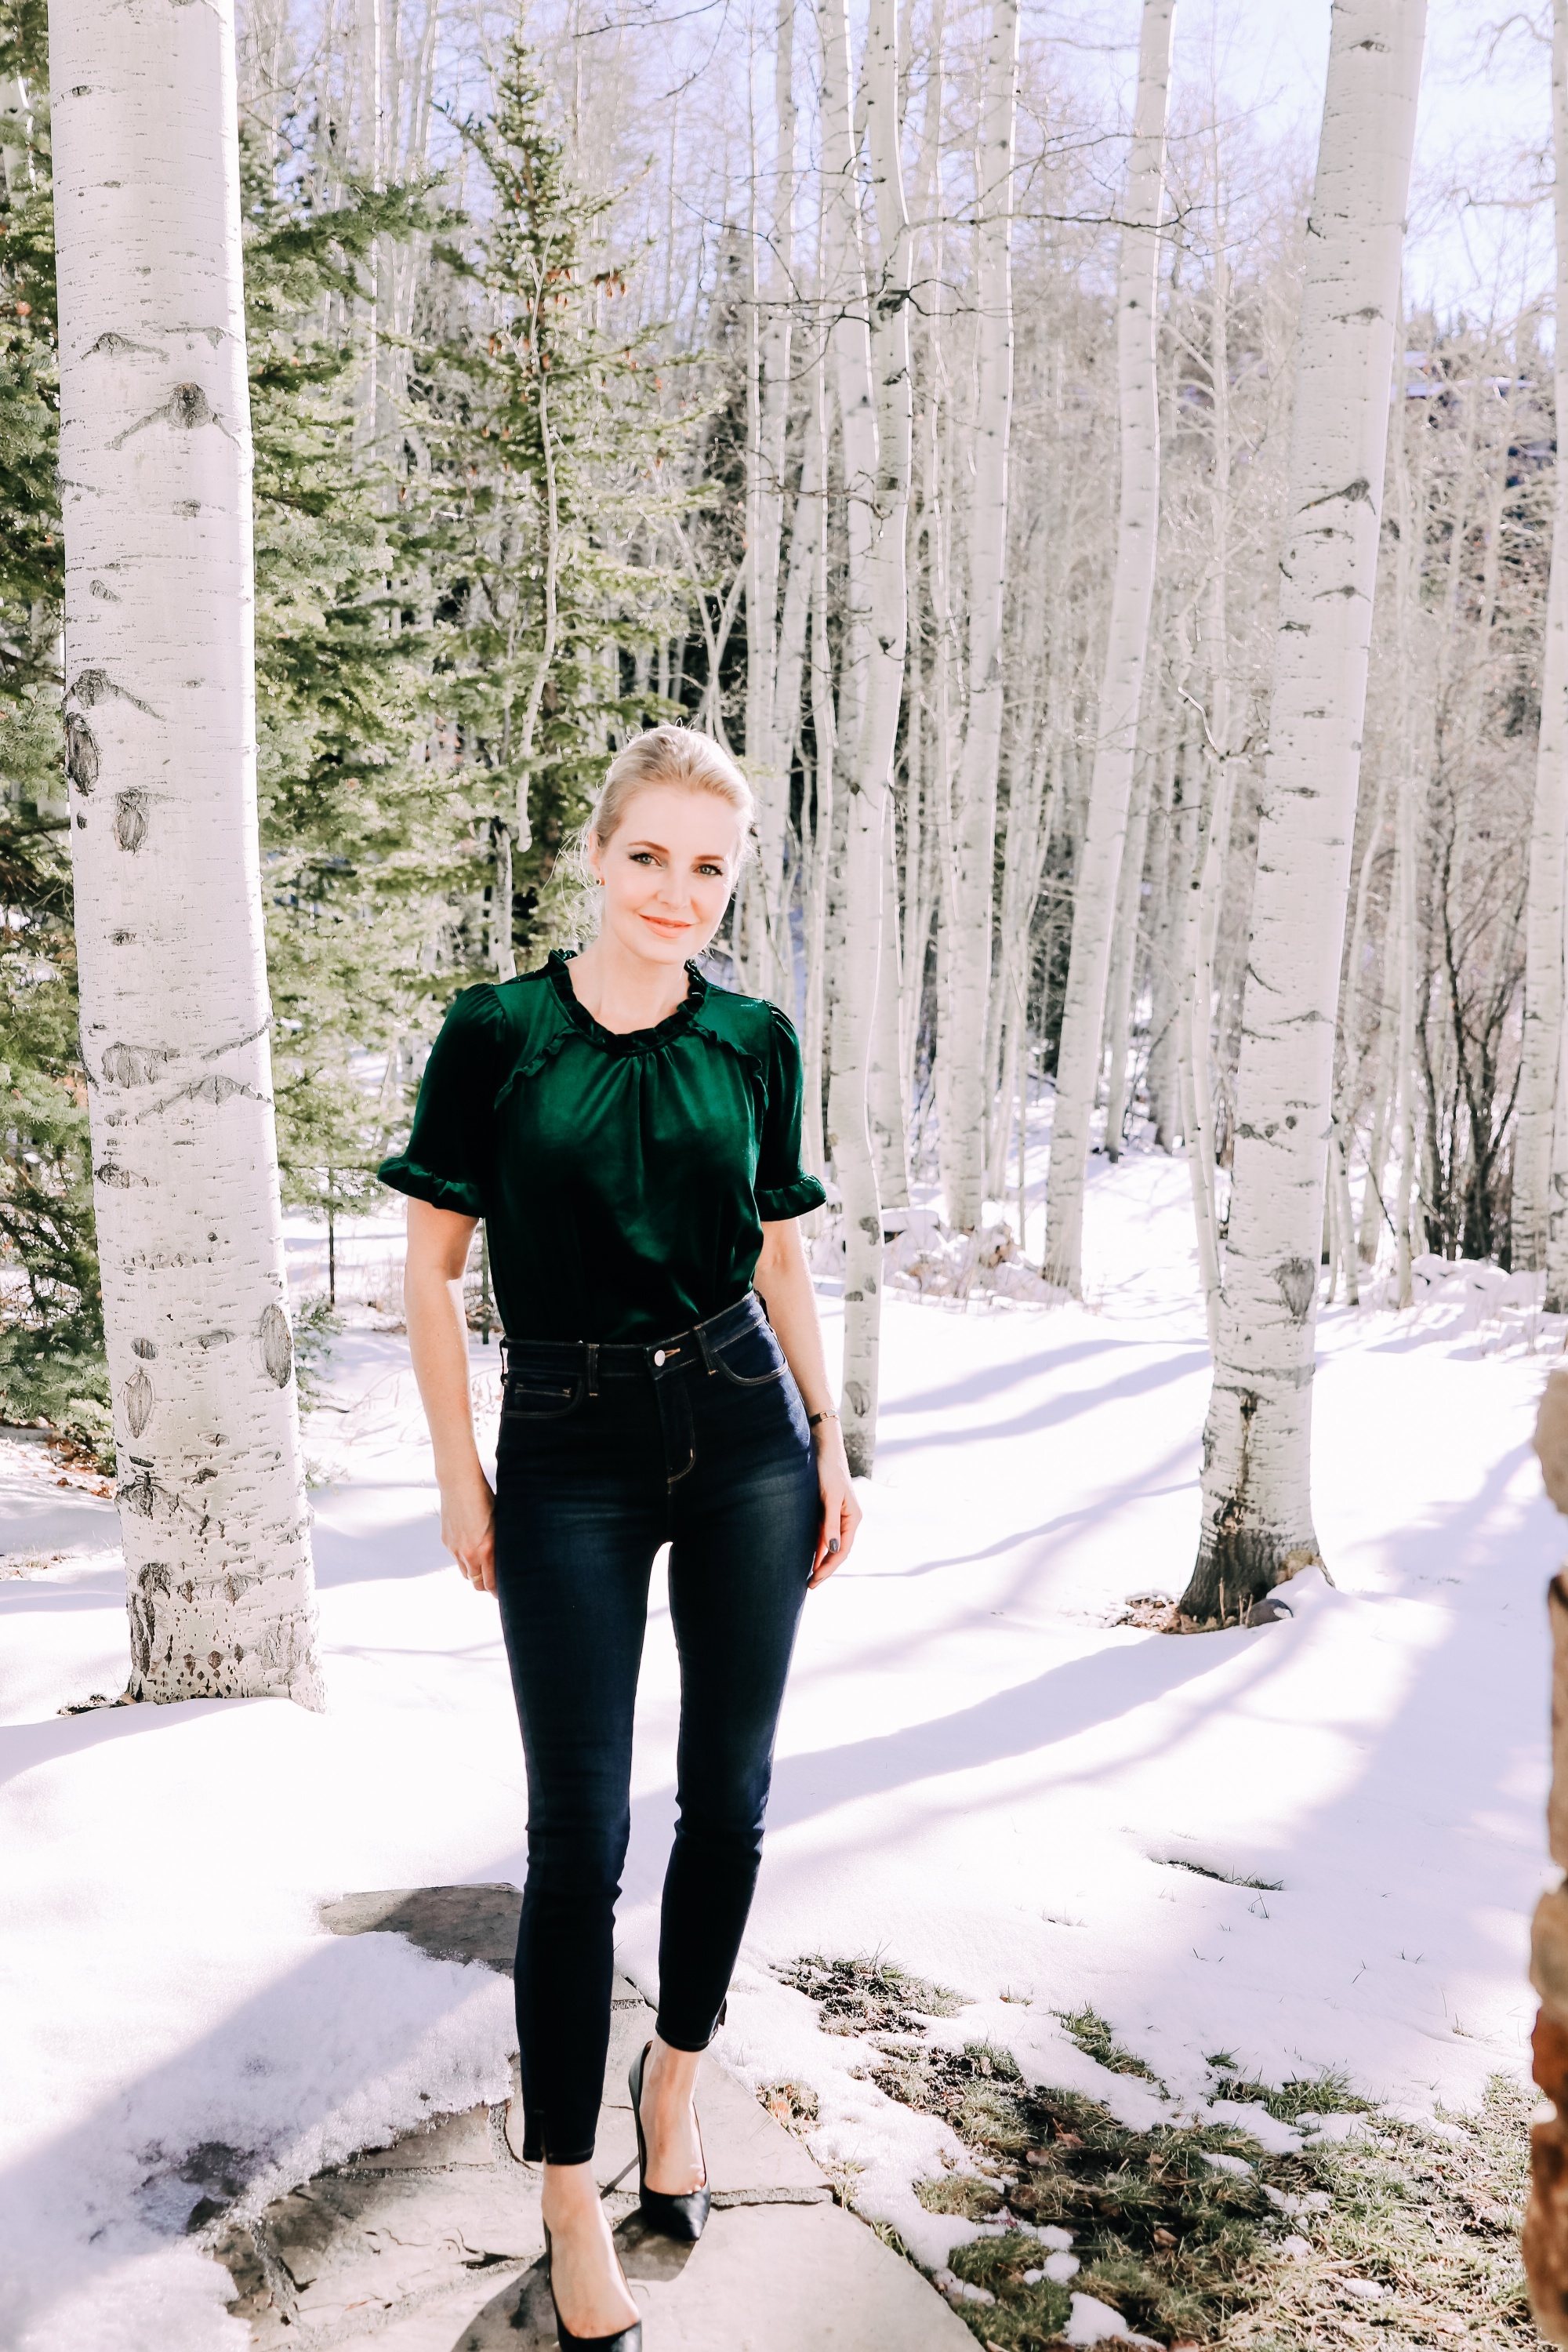 Holiday Outfits With Jeans, Erin Busbee of Busbee Style wearing a green velvet ruffle sleeve blouse by Gibson, L'Agence dark wash skinny jeans, and black Jimmy Choo Romy pumps from Nordstrom outside in the snow in Telluride, Colorado